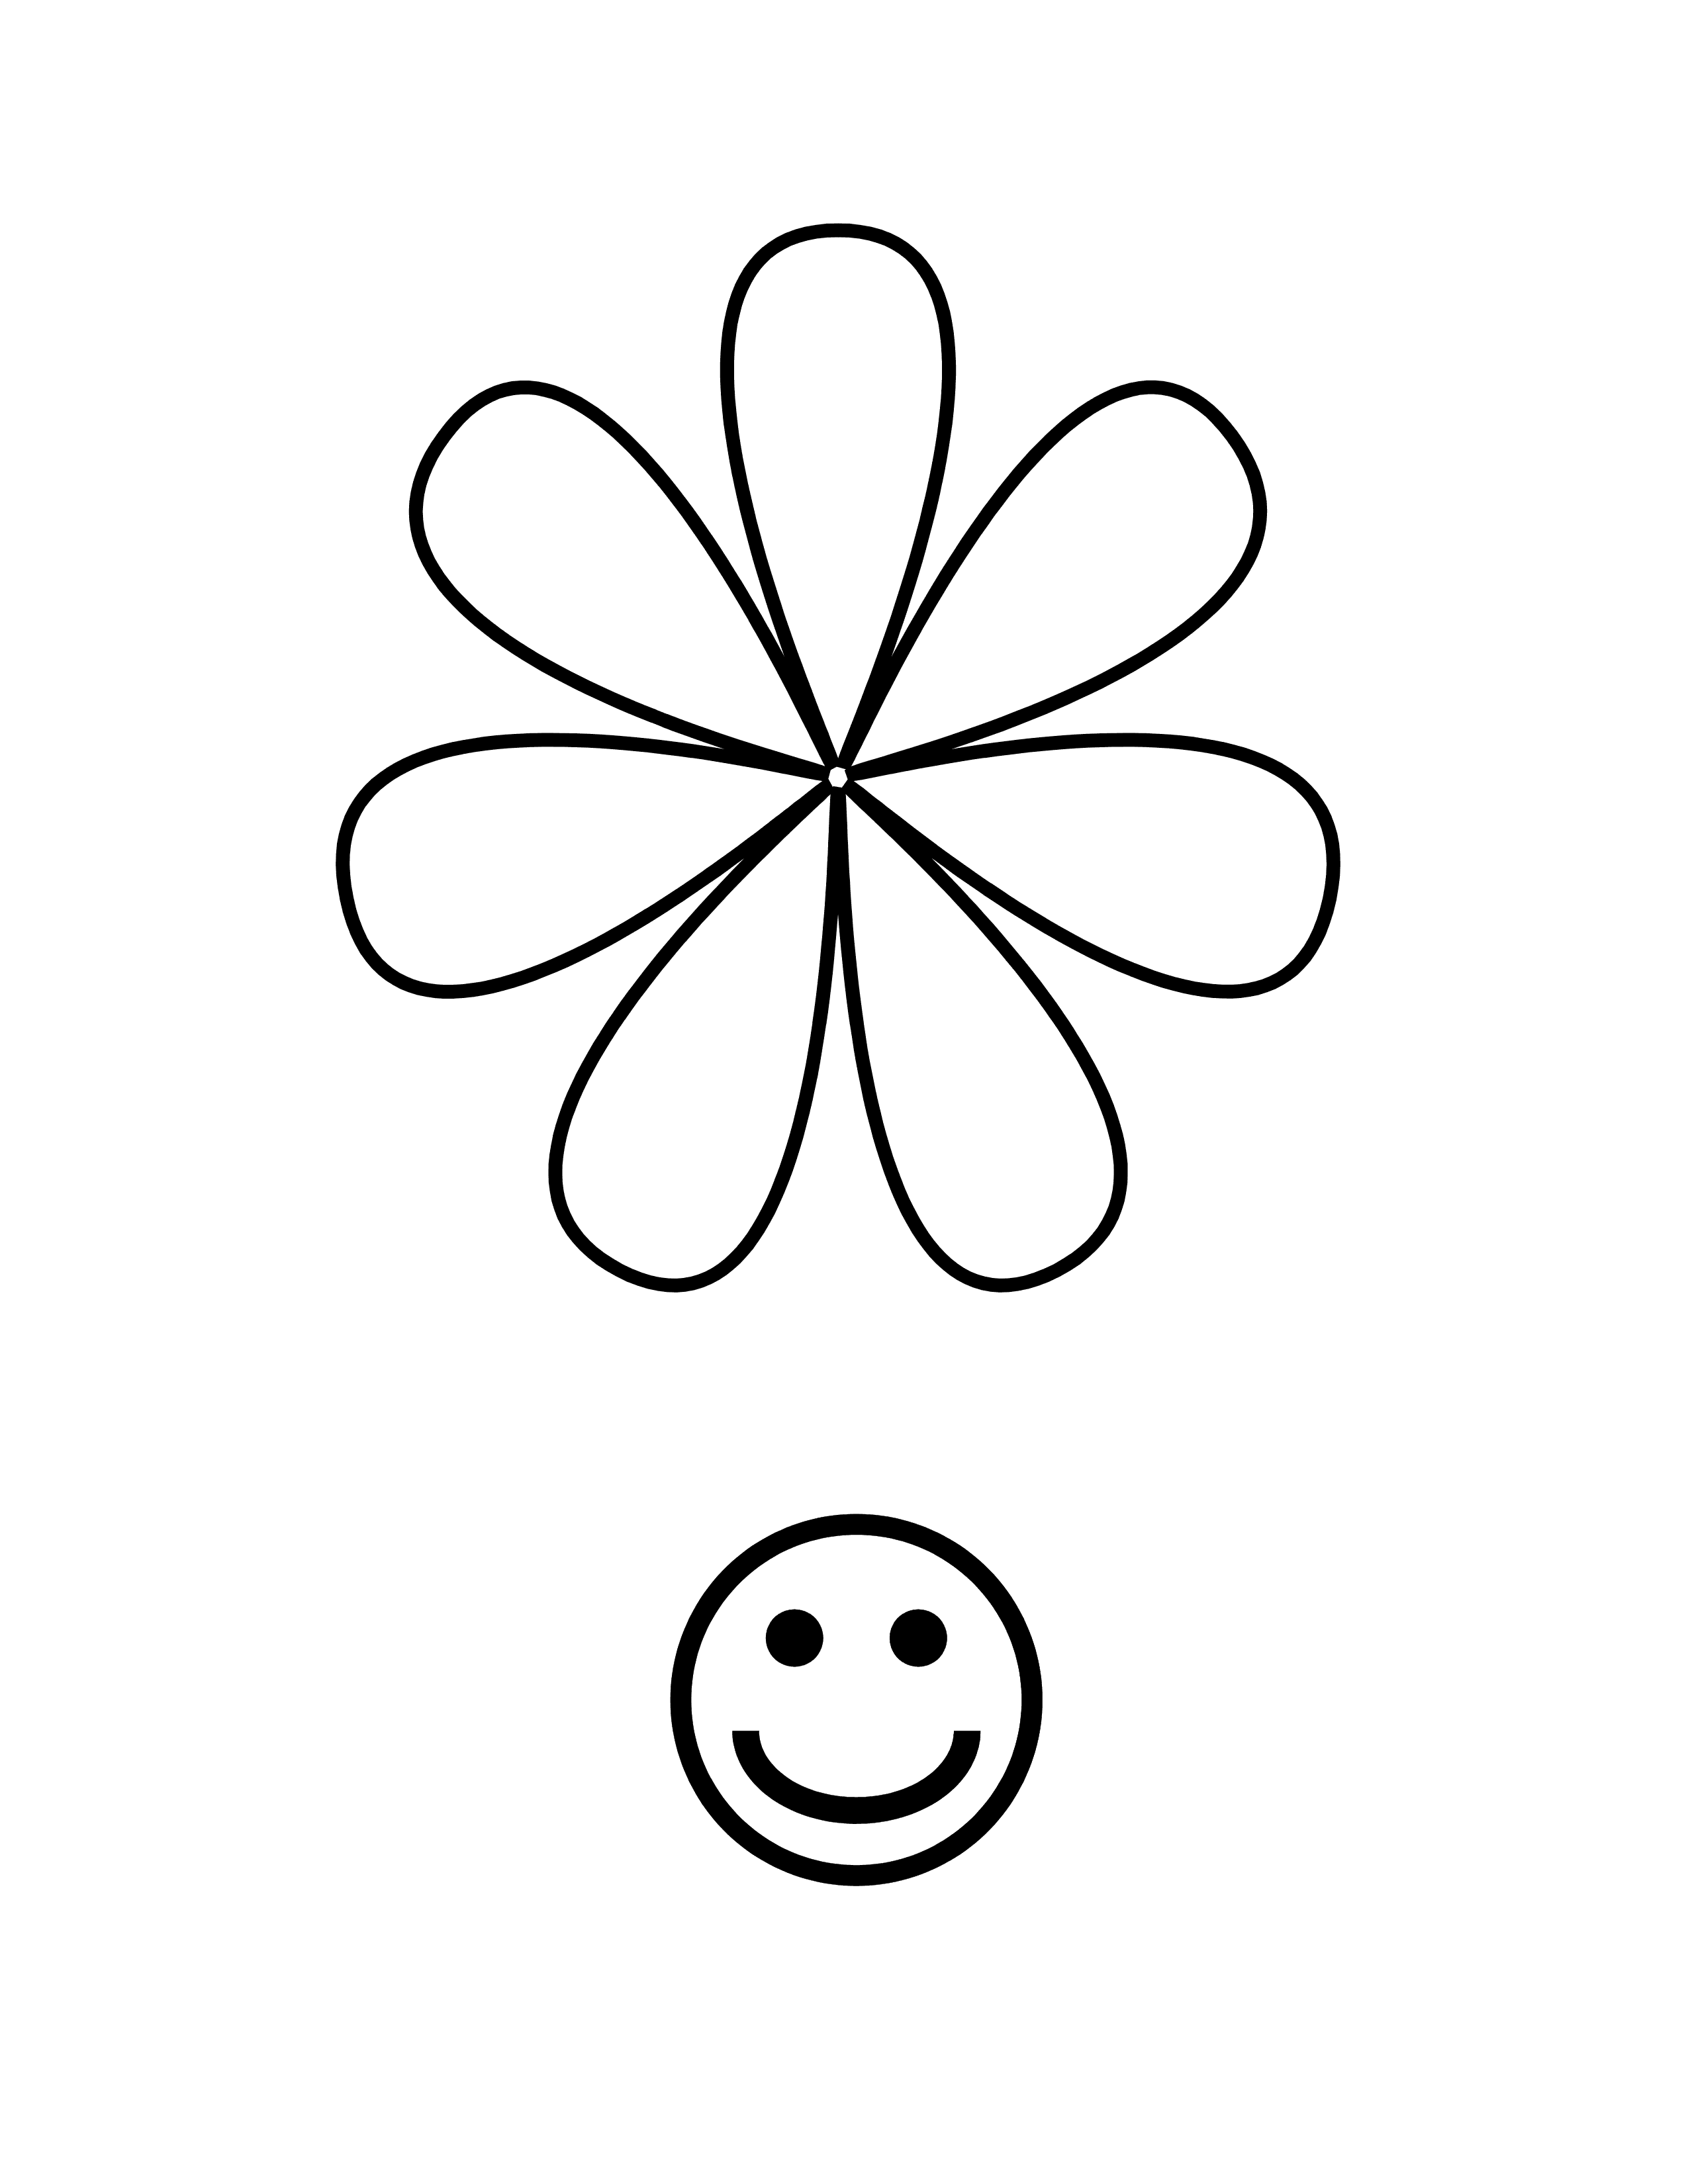 Daisy Flower Template. printable flowers to cut out patterns ...